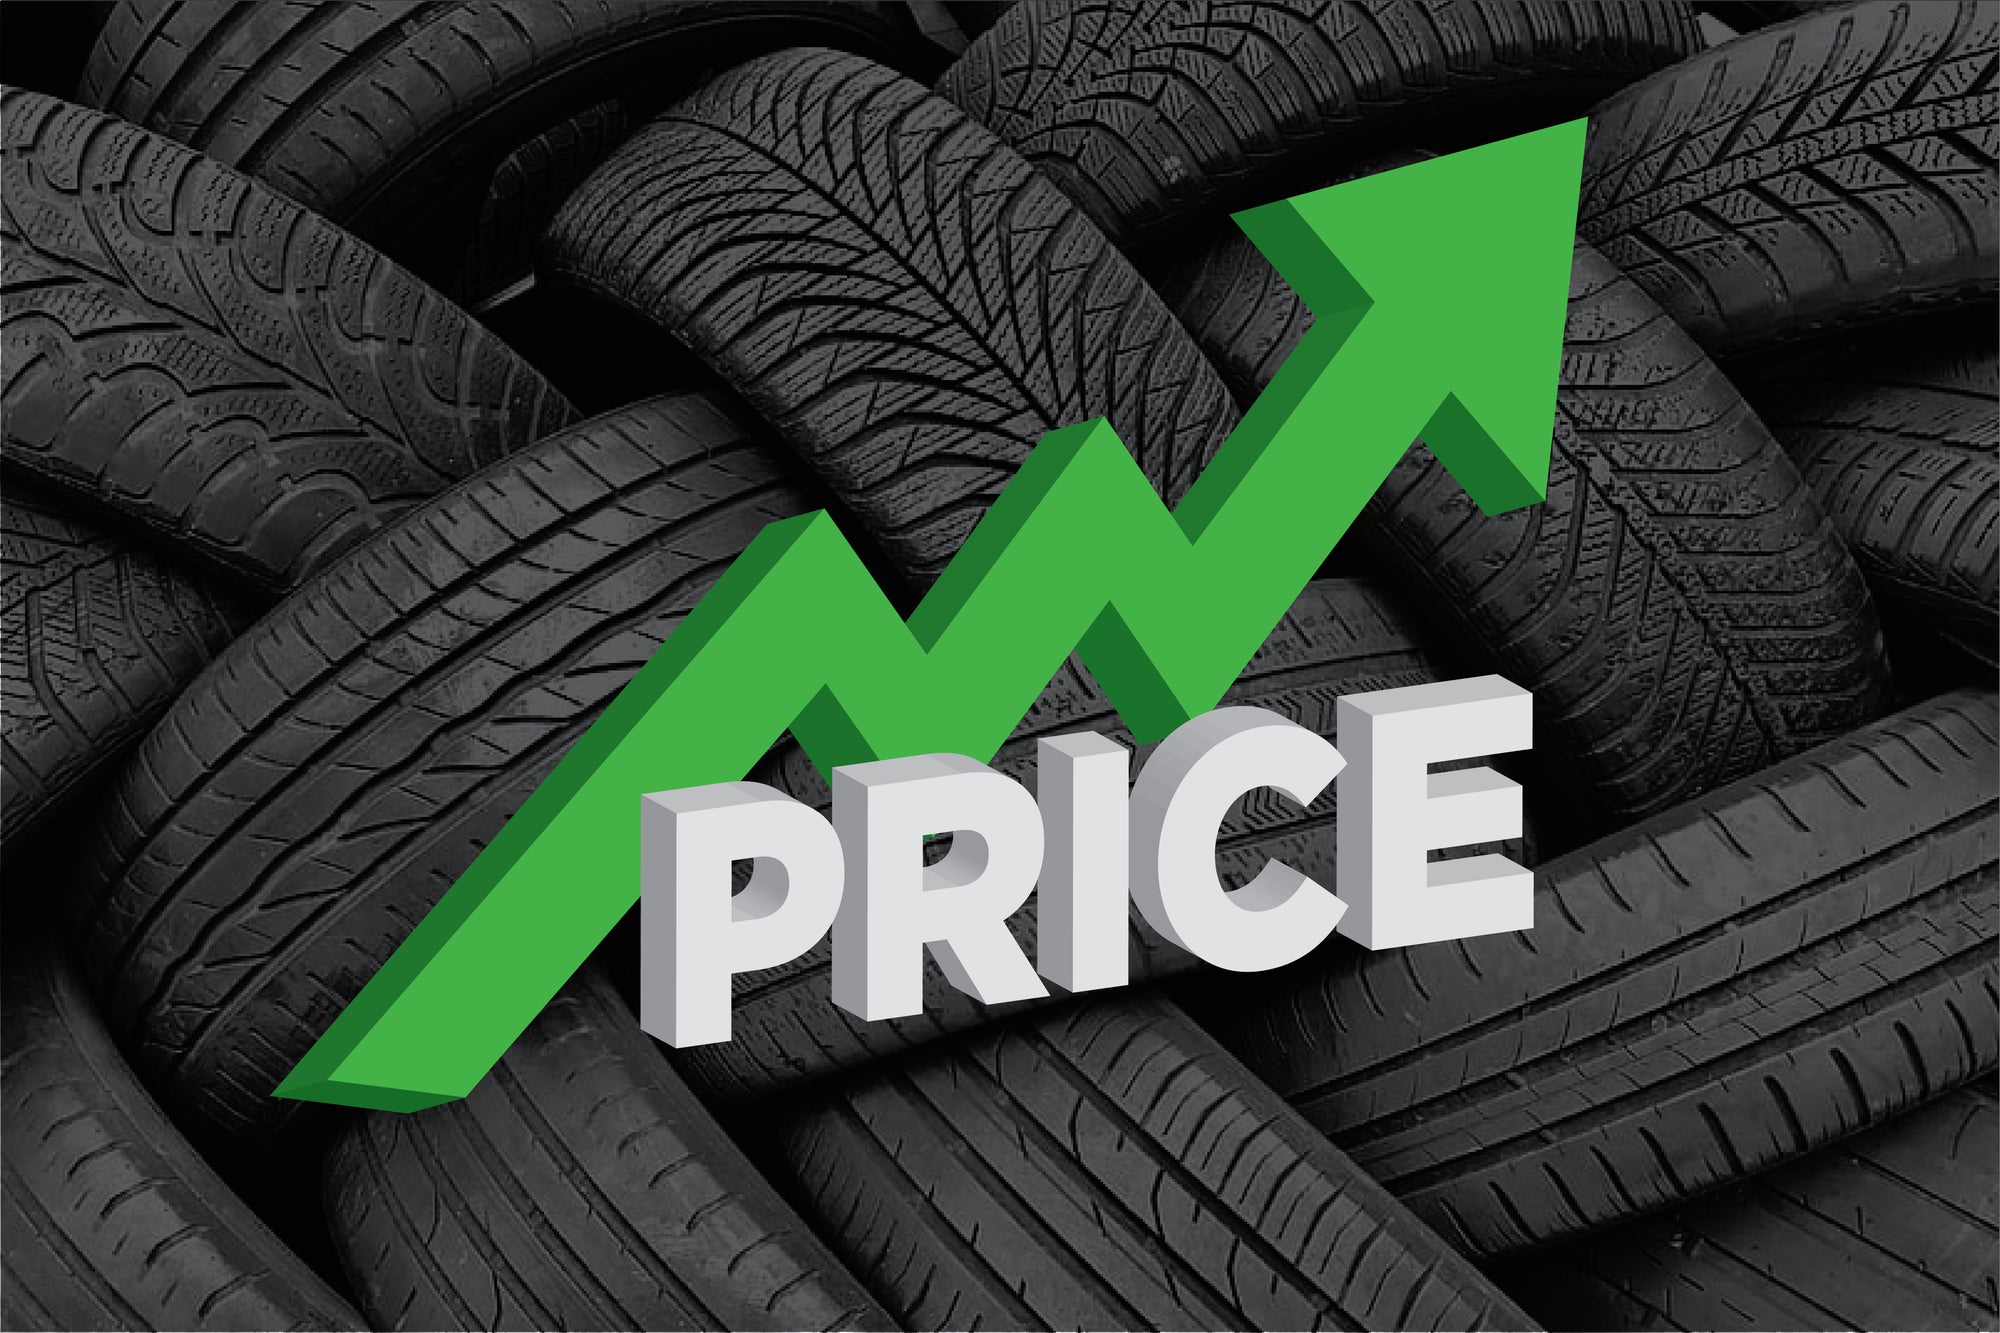 Michelin Continental Pirelli and Hankook Enact Multiple EV Tire Price Increases in 2021